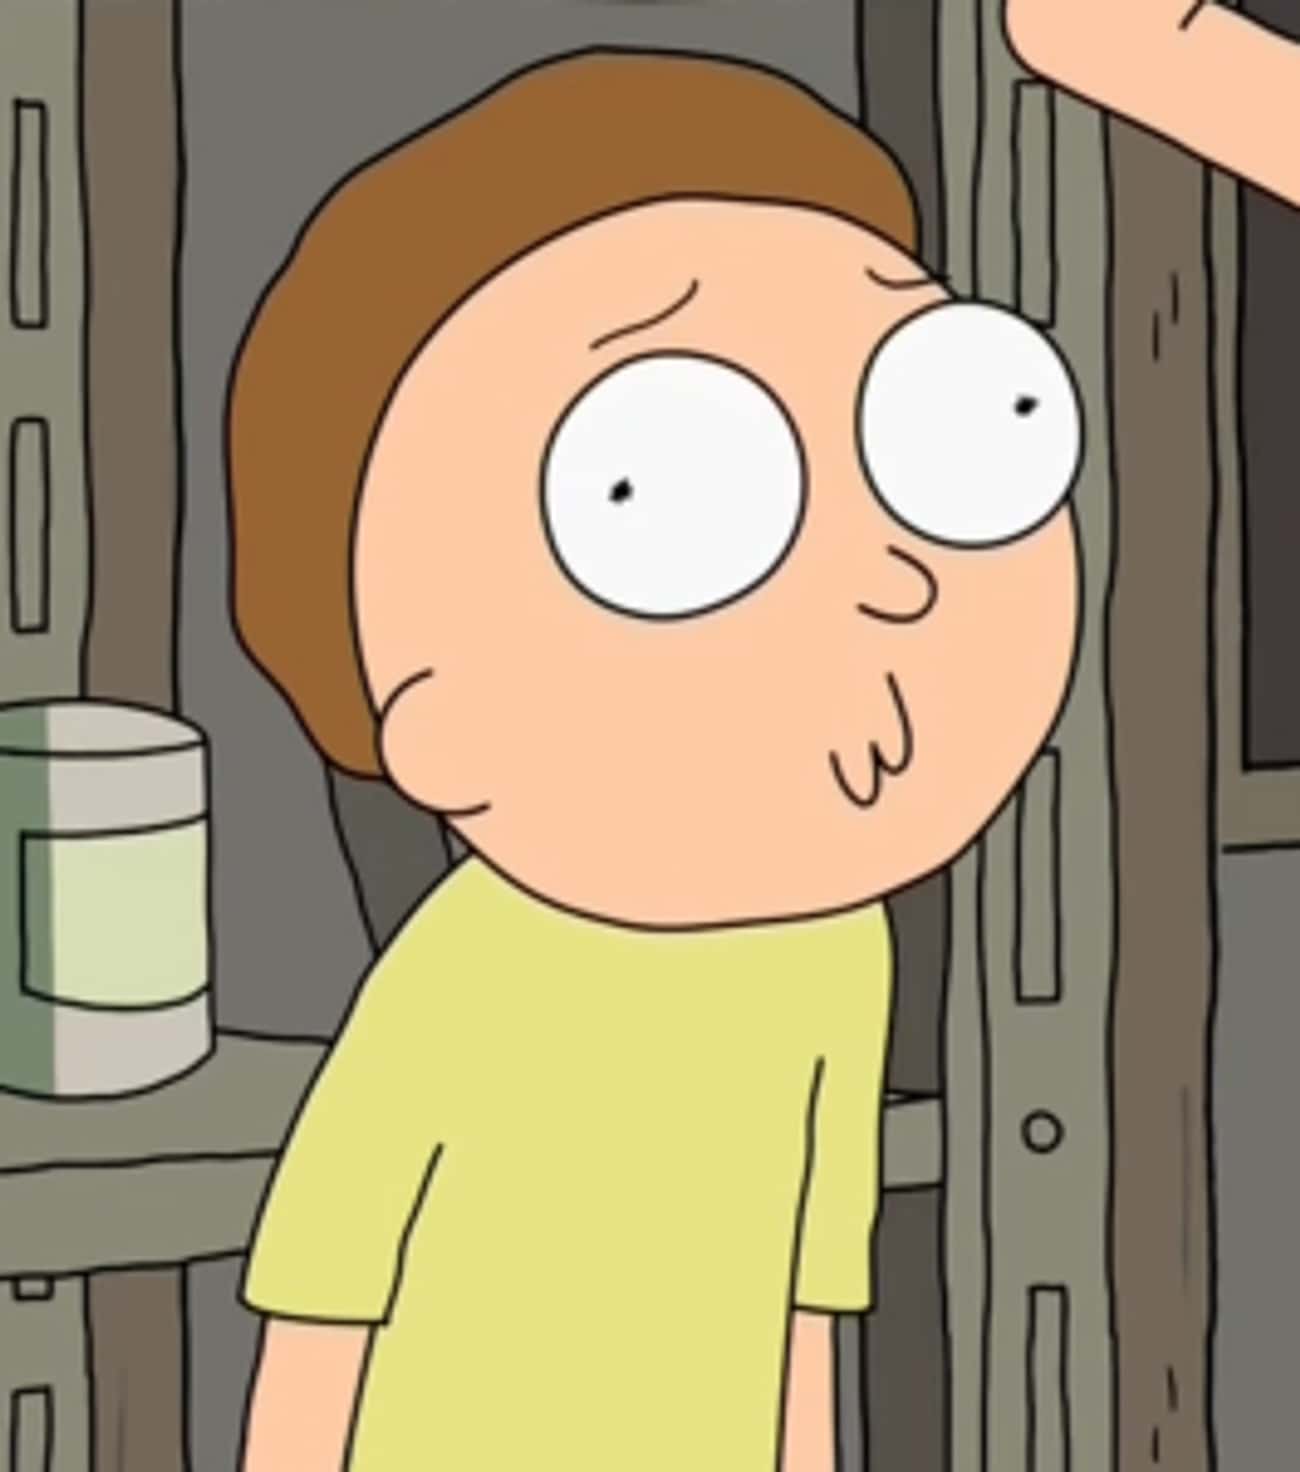 The Mortiest Morty Is Very Special